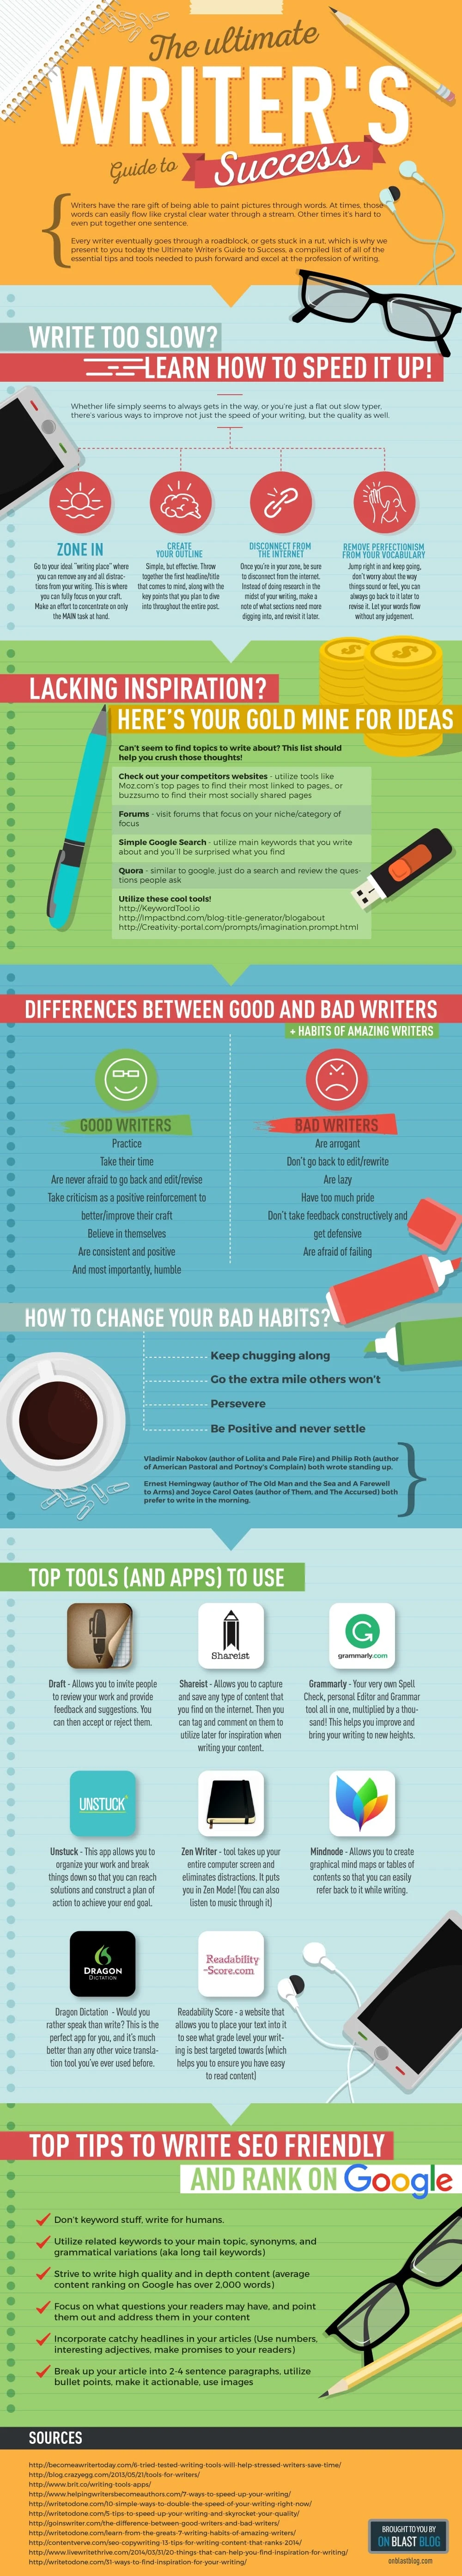 The Ultimate Writer's Guide to Success - #infographic